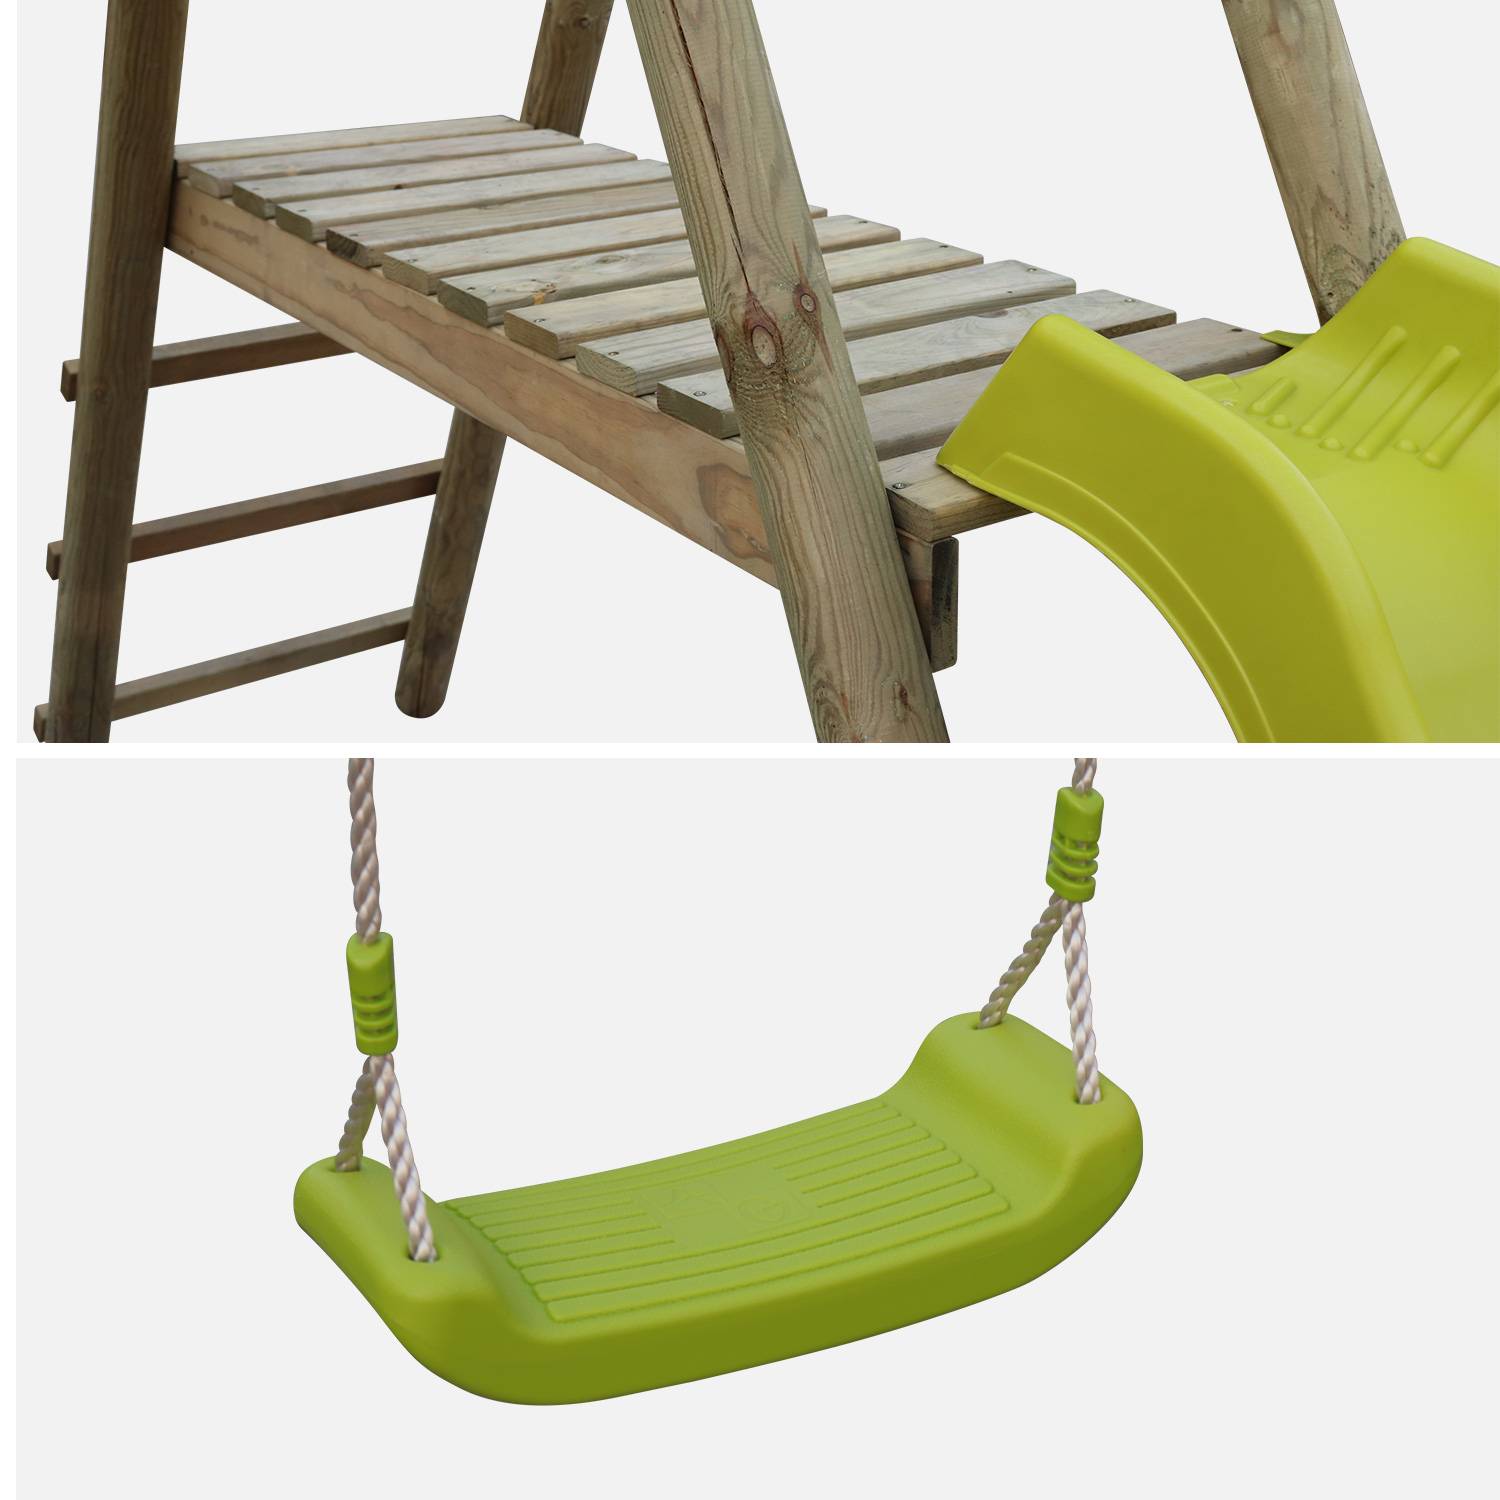 Wooden garden multiplay with slide, two swings and face to face glider - pressure treated FSC pine - Marin Photo4